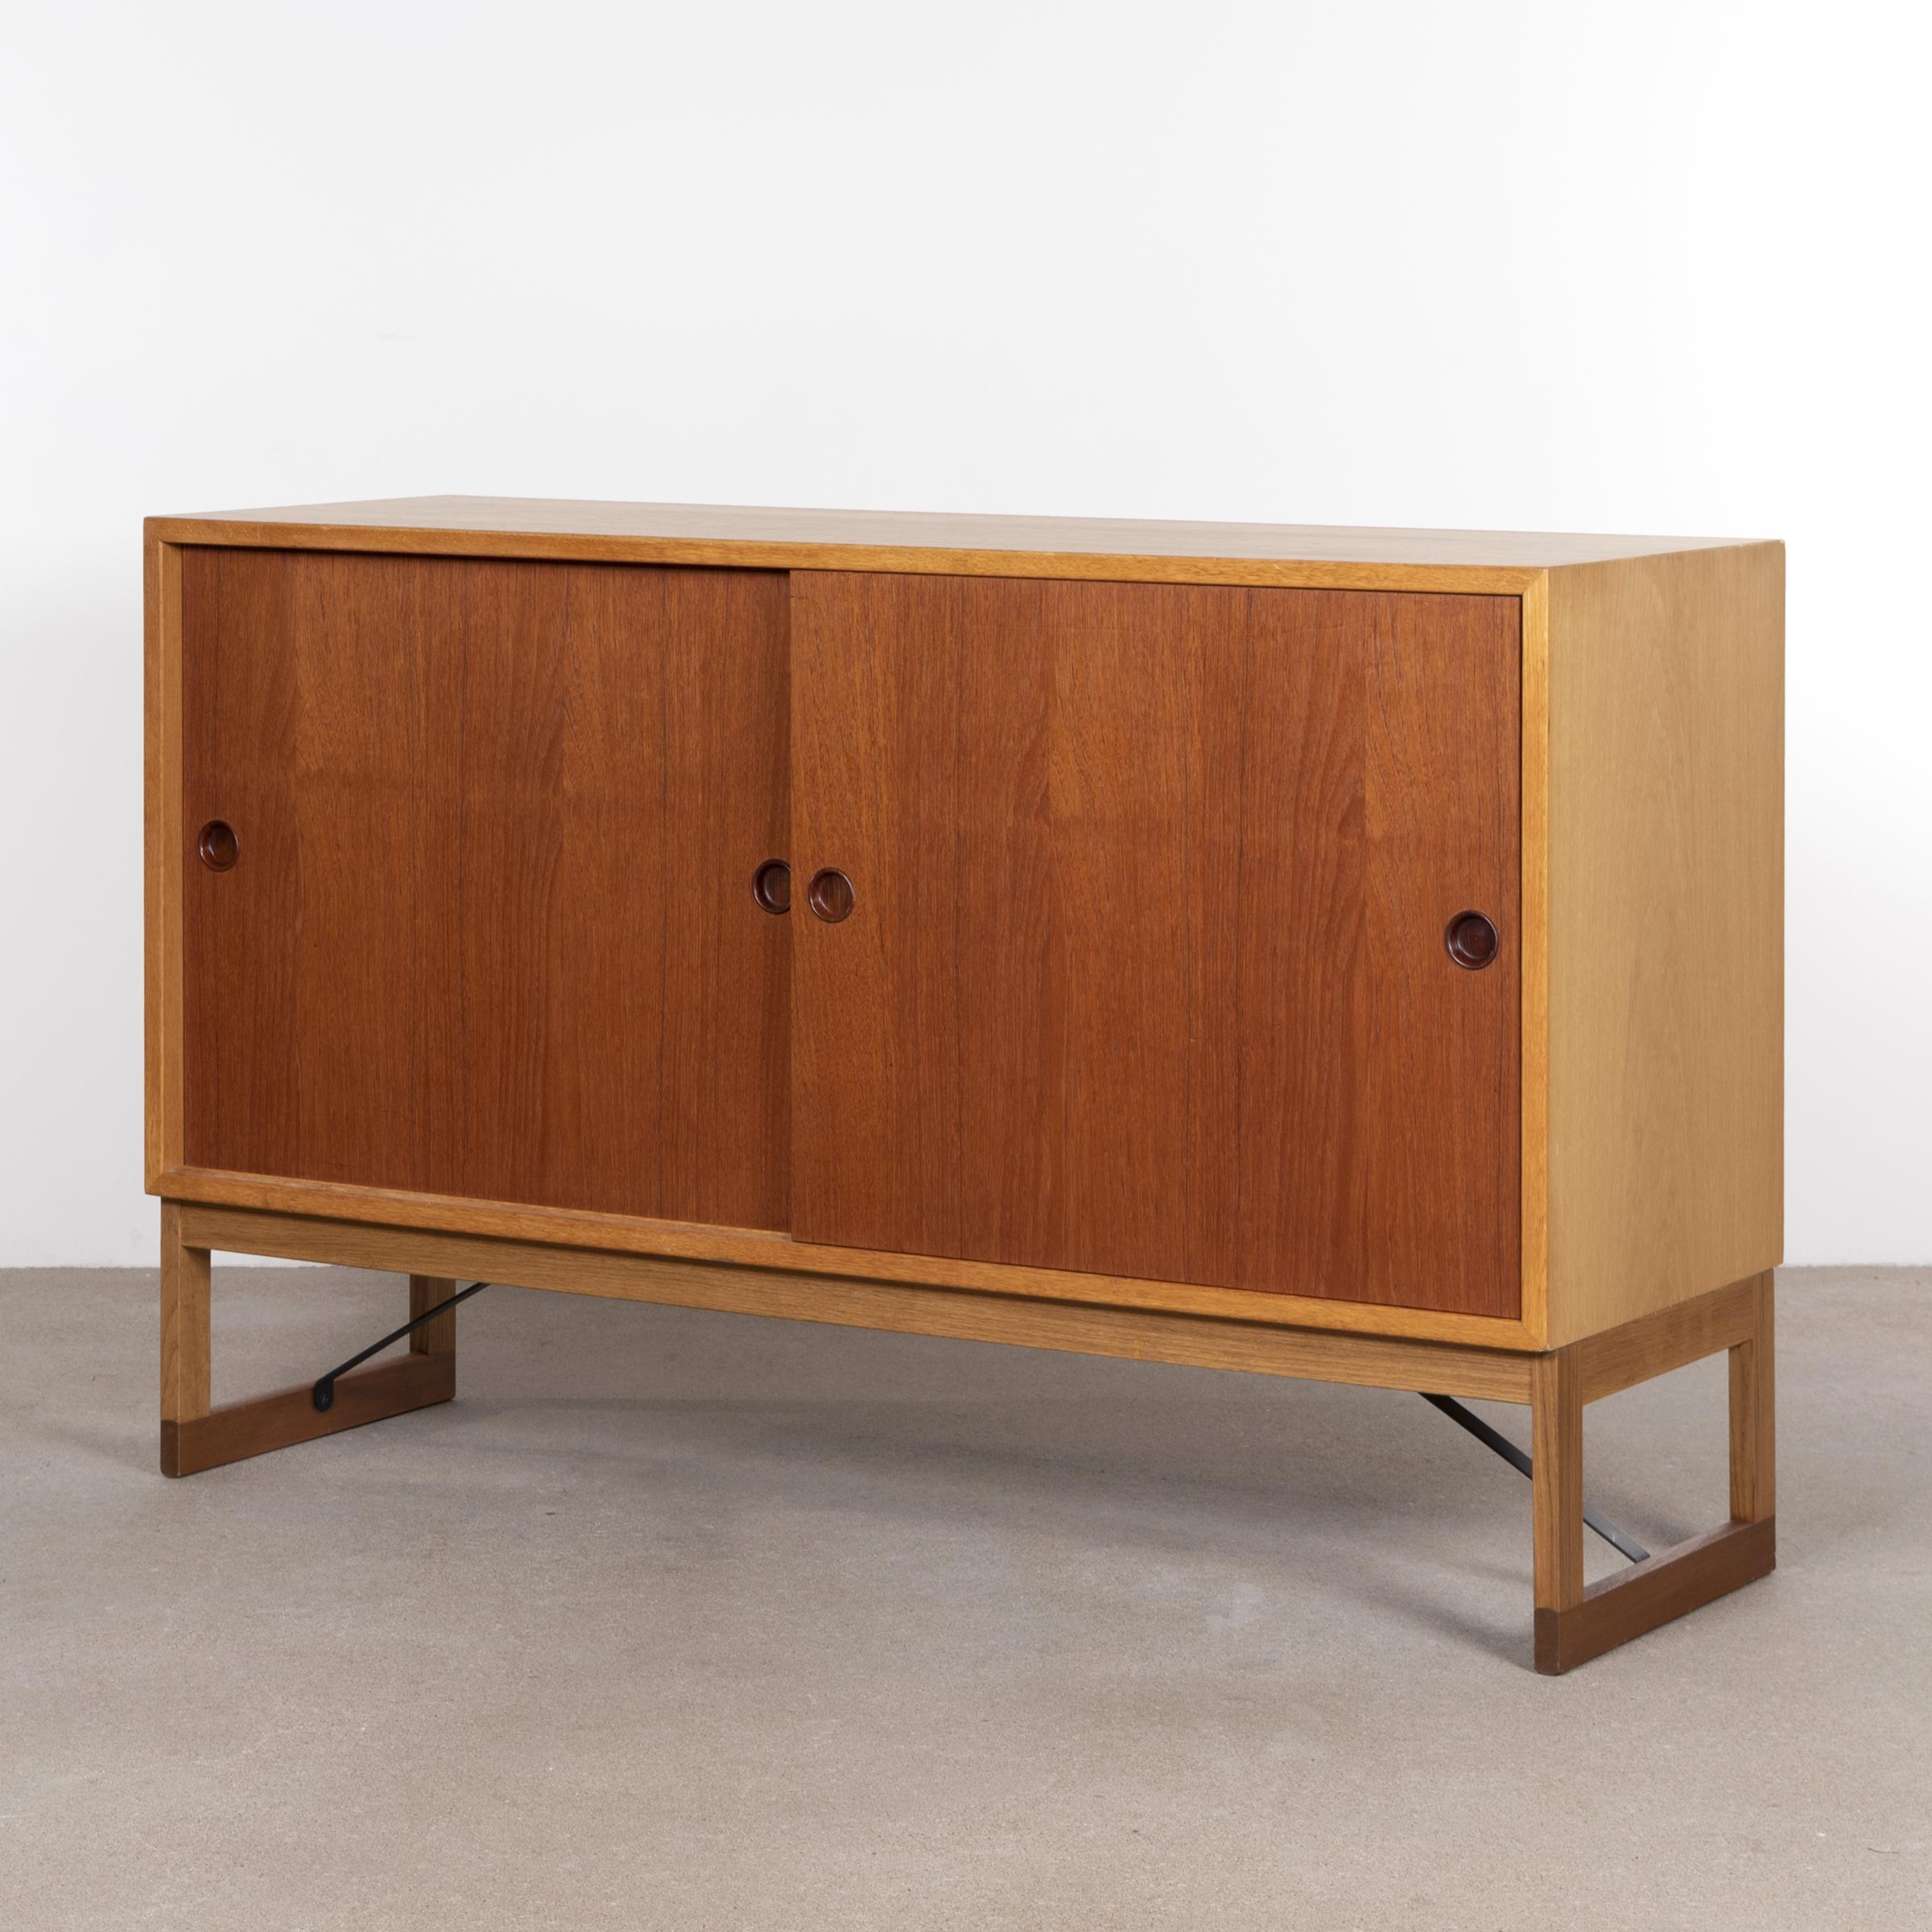 Elegant cabinet by Børge Mogensen for Karl Andersson & Soner. Oak corpus with teak sliding doors (both directions) and glides. Shelves can be moved as required. All in good vintage condition with minor traces of use. A matching set is available.